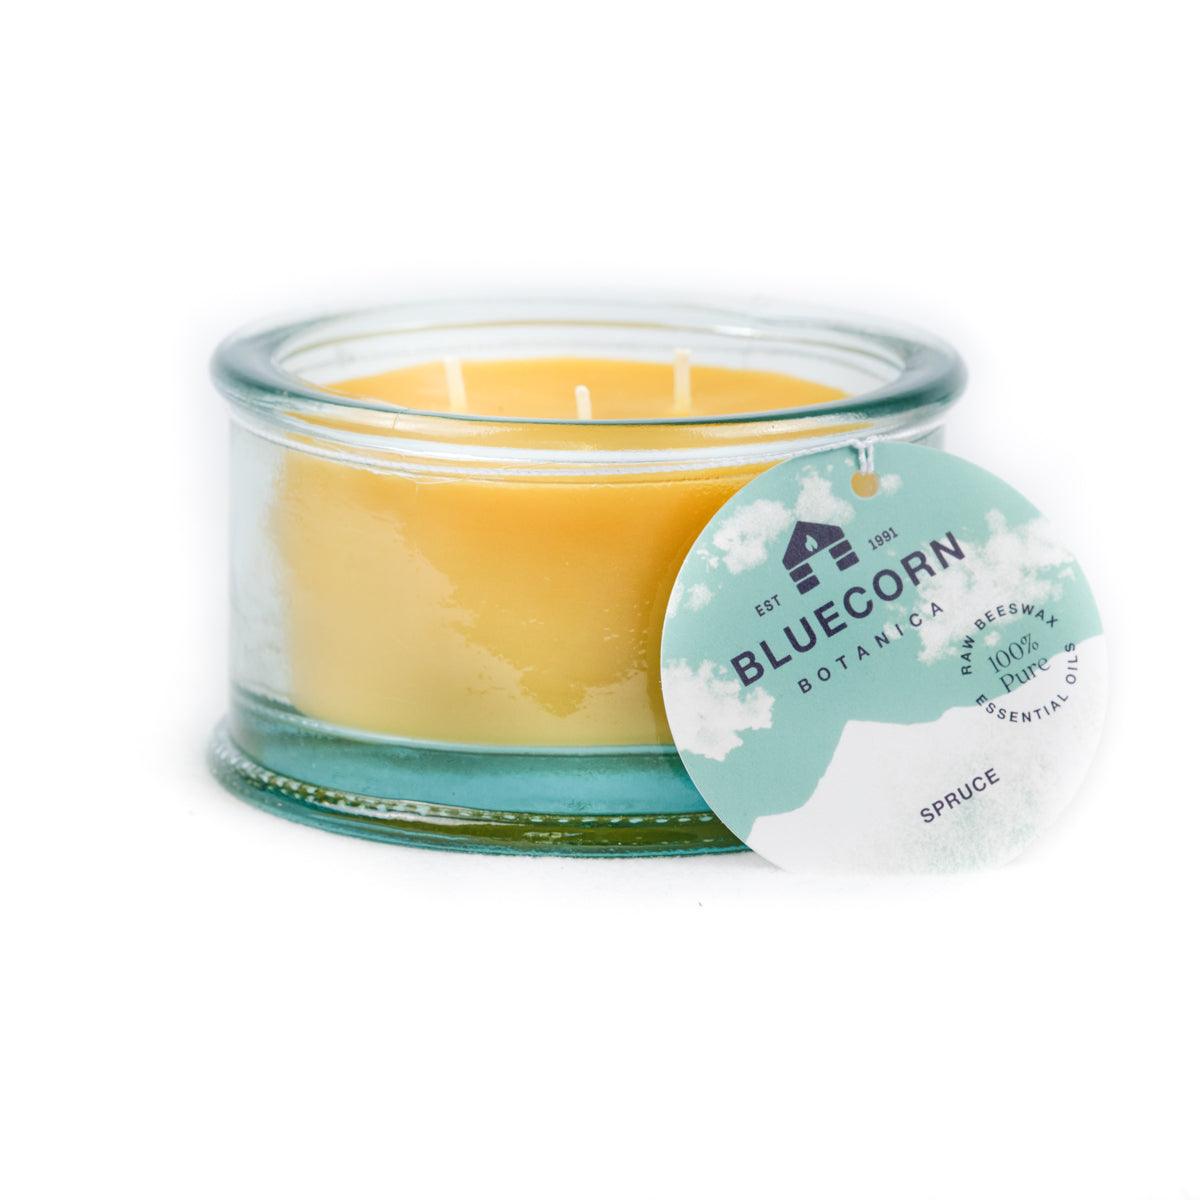 Bluecorn Botanica 100% Pure Beeswax Spruce 10oz 3-Wick Glass Candle. Wax is golden in color and glass is clear colored, with a white back drop. Features green Bluecorn Botanica hang tag printed on 100% recyled paper with Bluecorn name and logo. Burn Time: 18 hours.  Made with 100% Pure Beeswax, 100% Pure Essentail Oils and a 100% pure cotton wick, no lead. Candles are paraffin free, clean burning and non-toxic. 